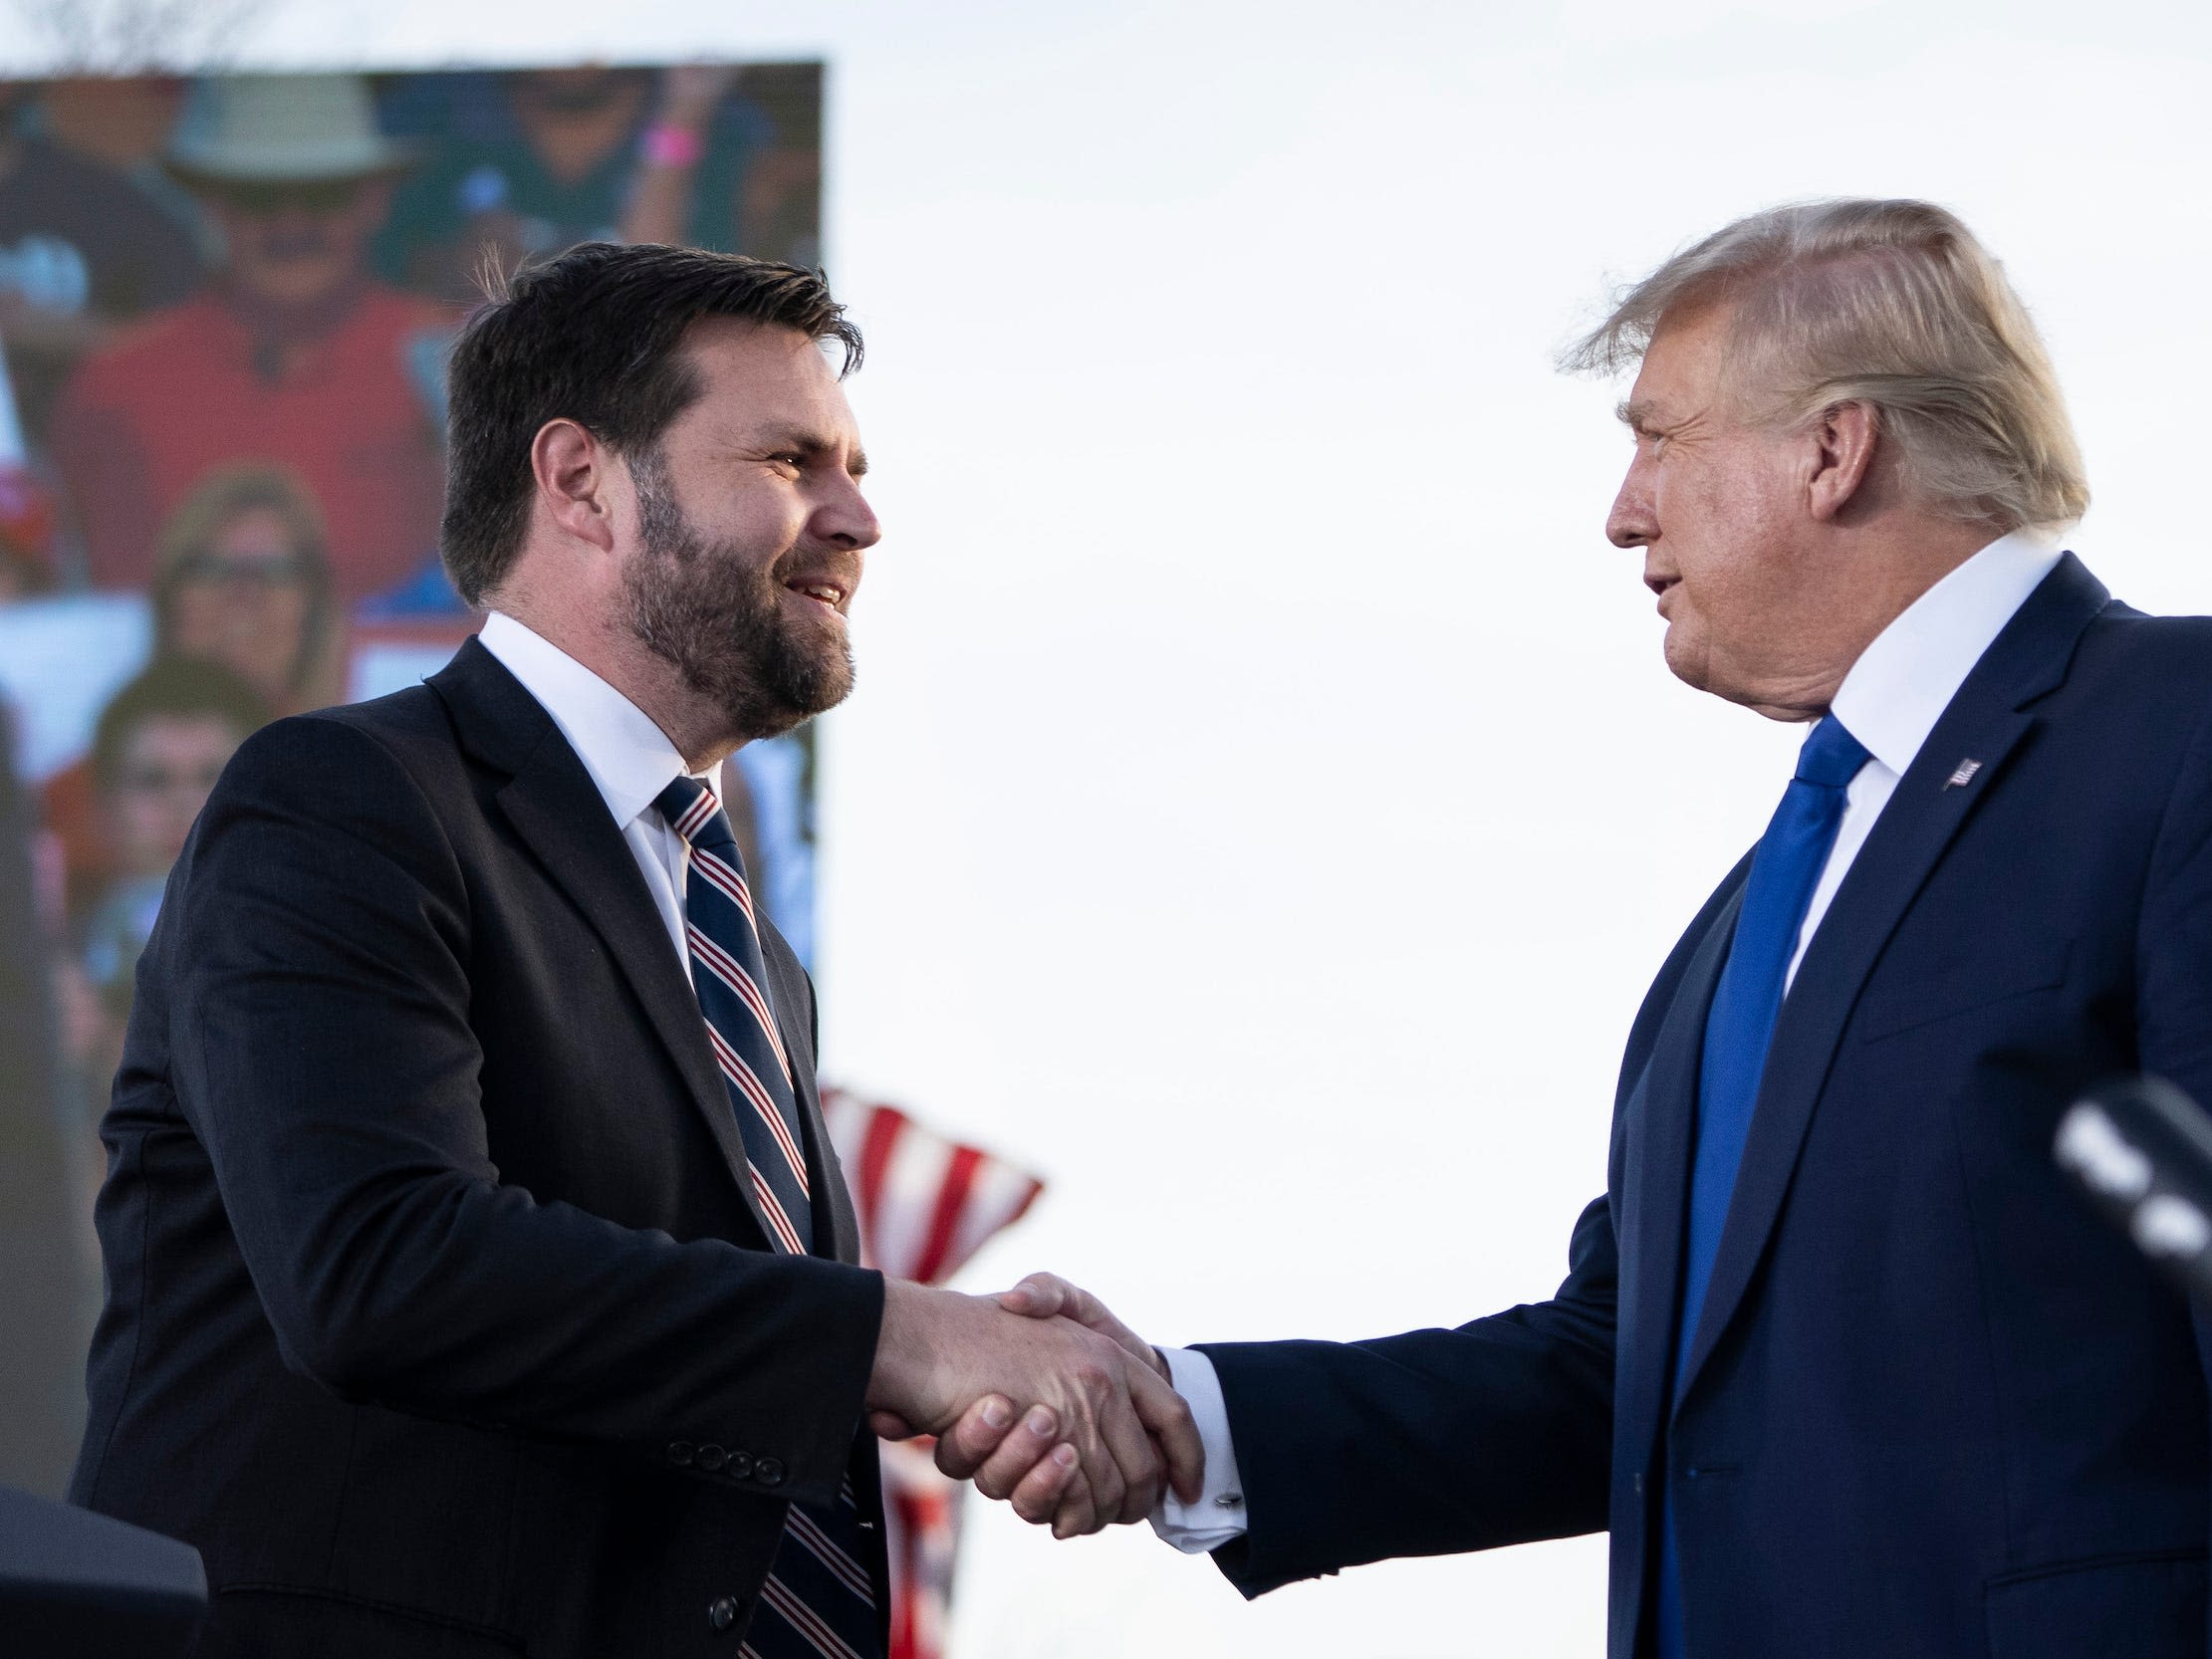 Trump selects JD Vance as his running mate